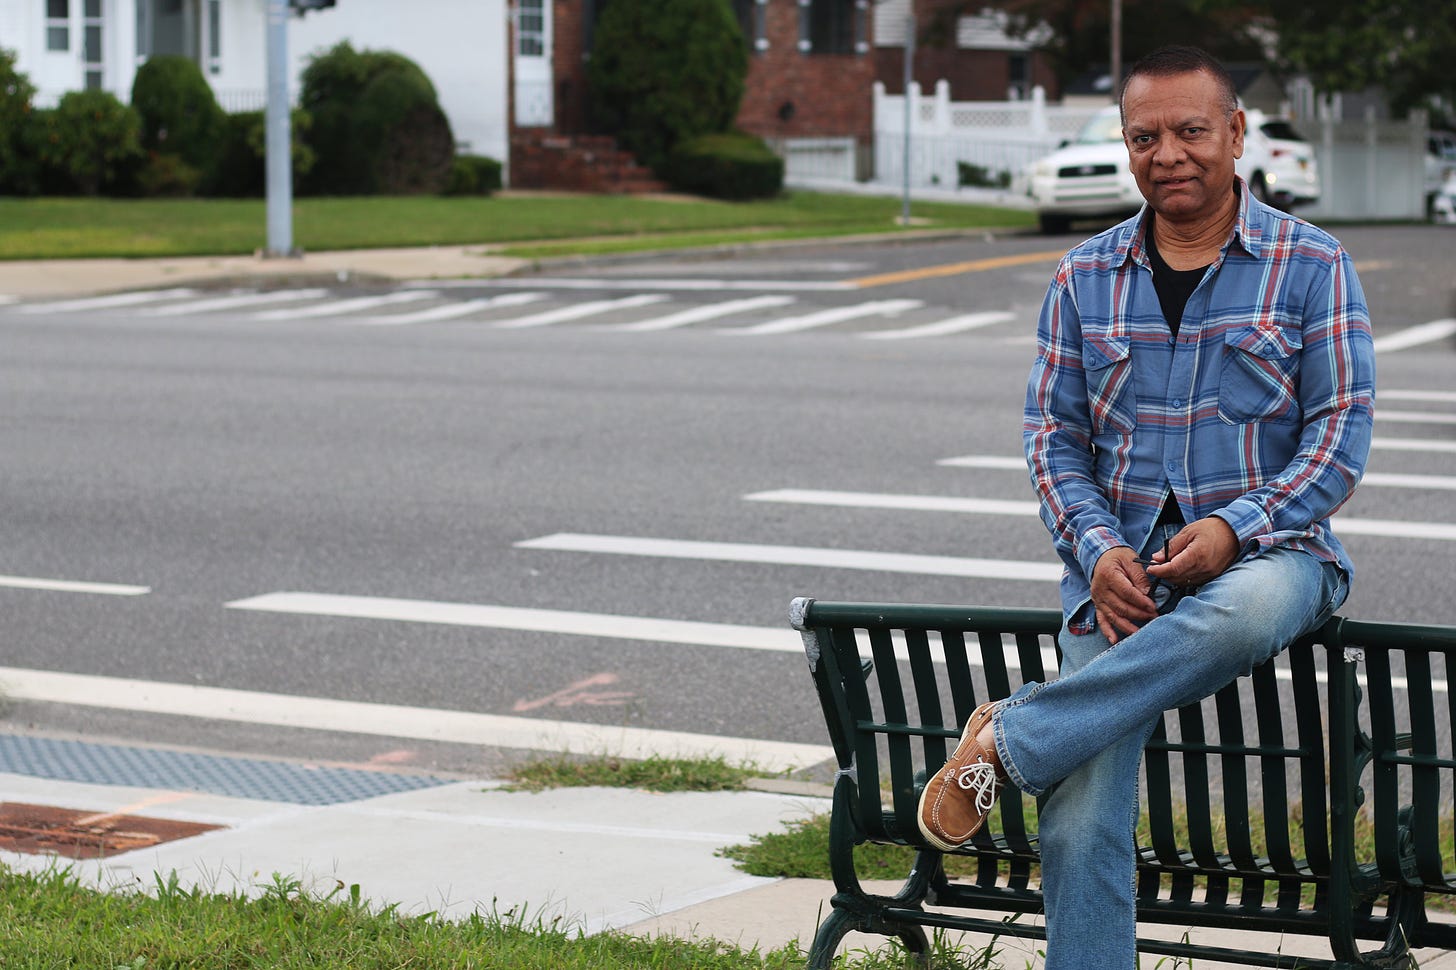 Stanley Praimnath sits in Elmont, N.Y, the Long Island town where he lived in 2001. Photo by Micah Danney.